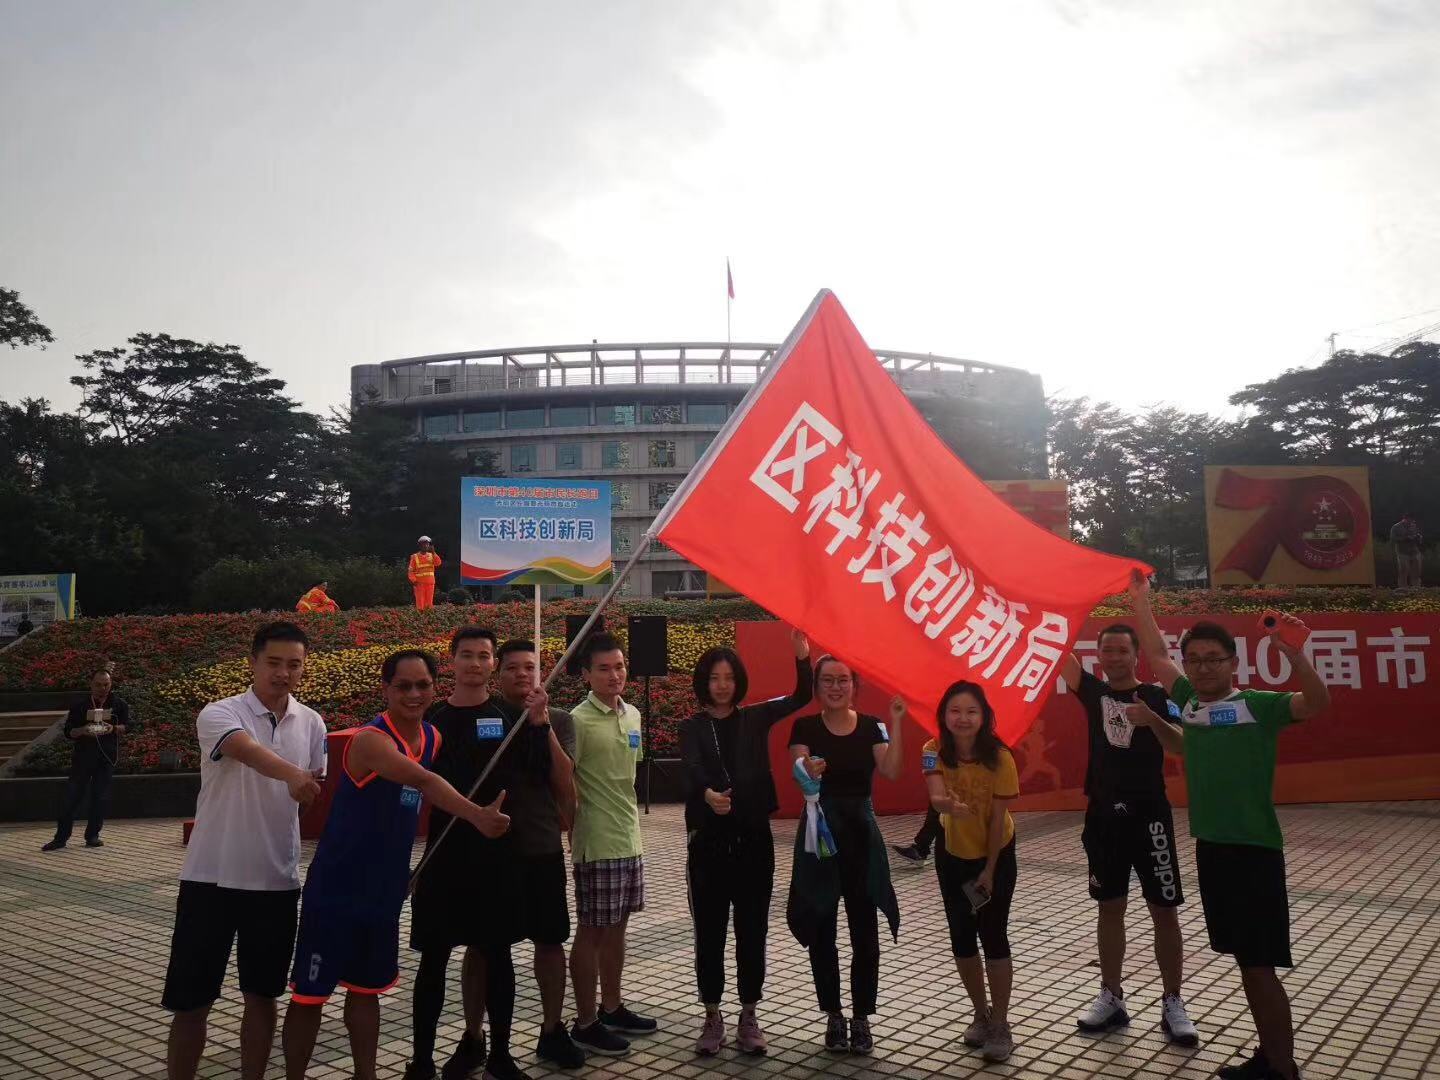 General Manager Wang Shenxiang participated in the 40th Citizens' Long-distance Running Day in Shenzhen at the Guangming Science and Technology Innovation Bureau